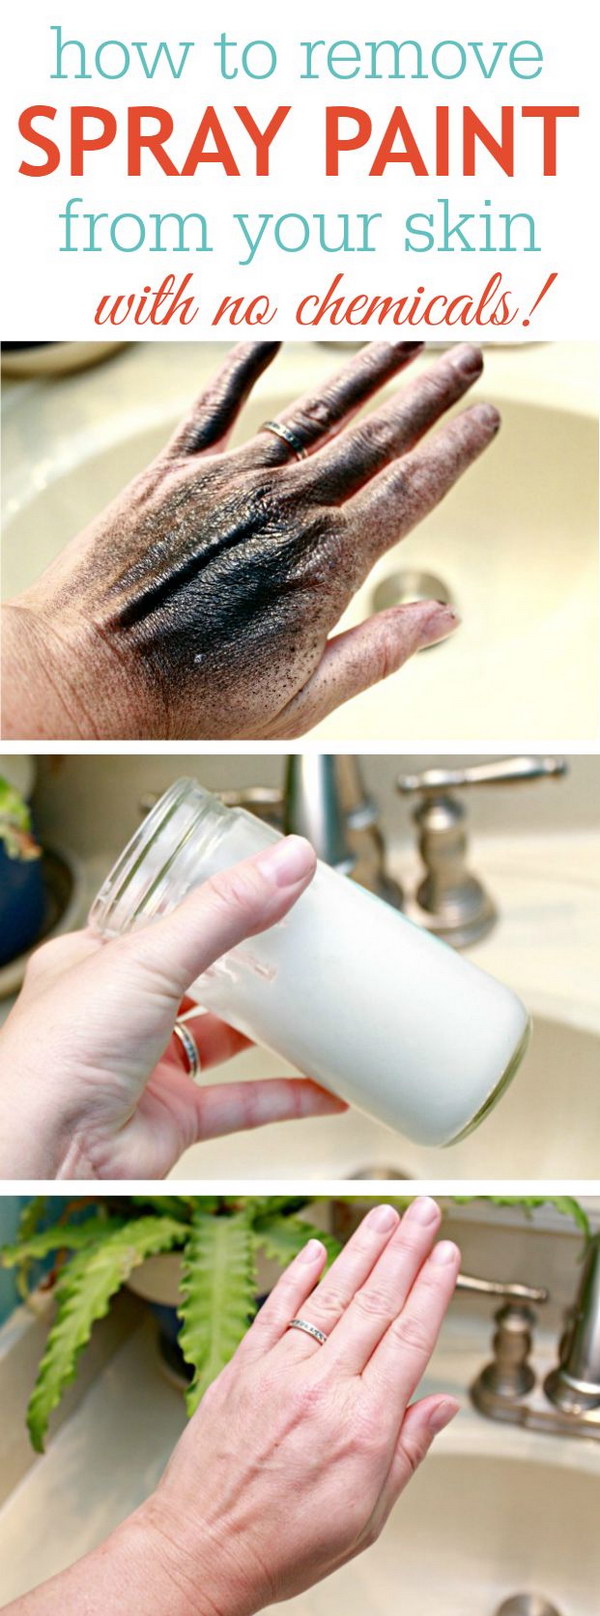 How to remove spray paint with coconut oil and baking soda from your skin. 